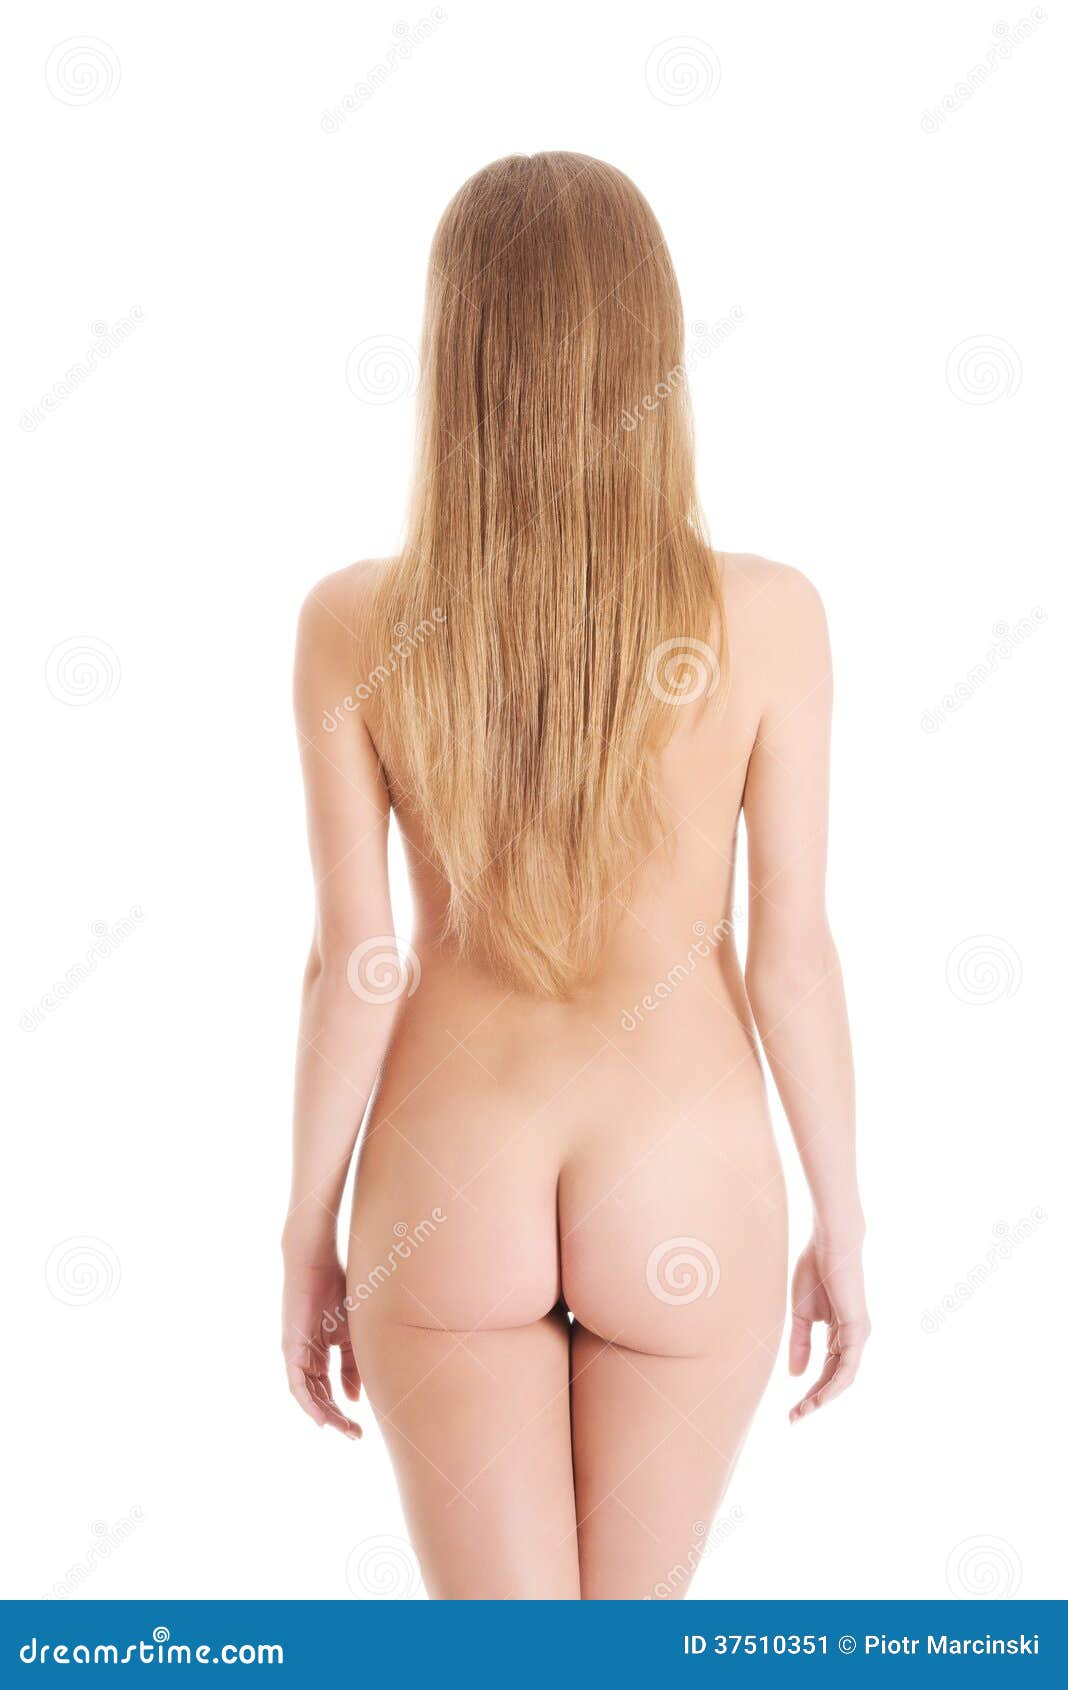 Naked women from the back